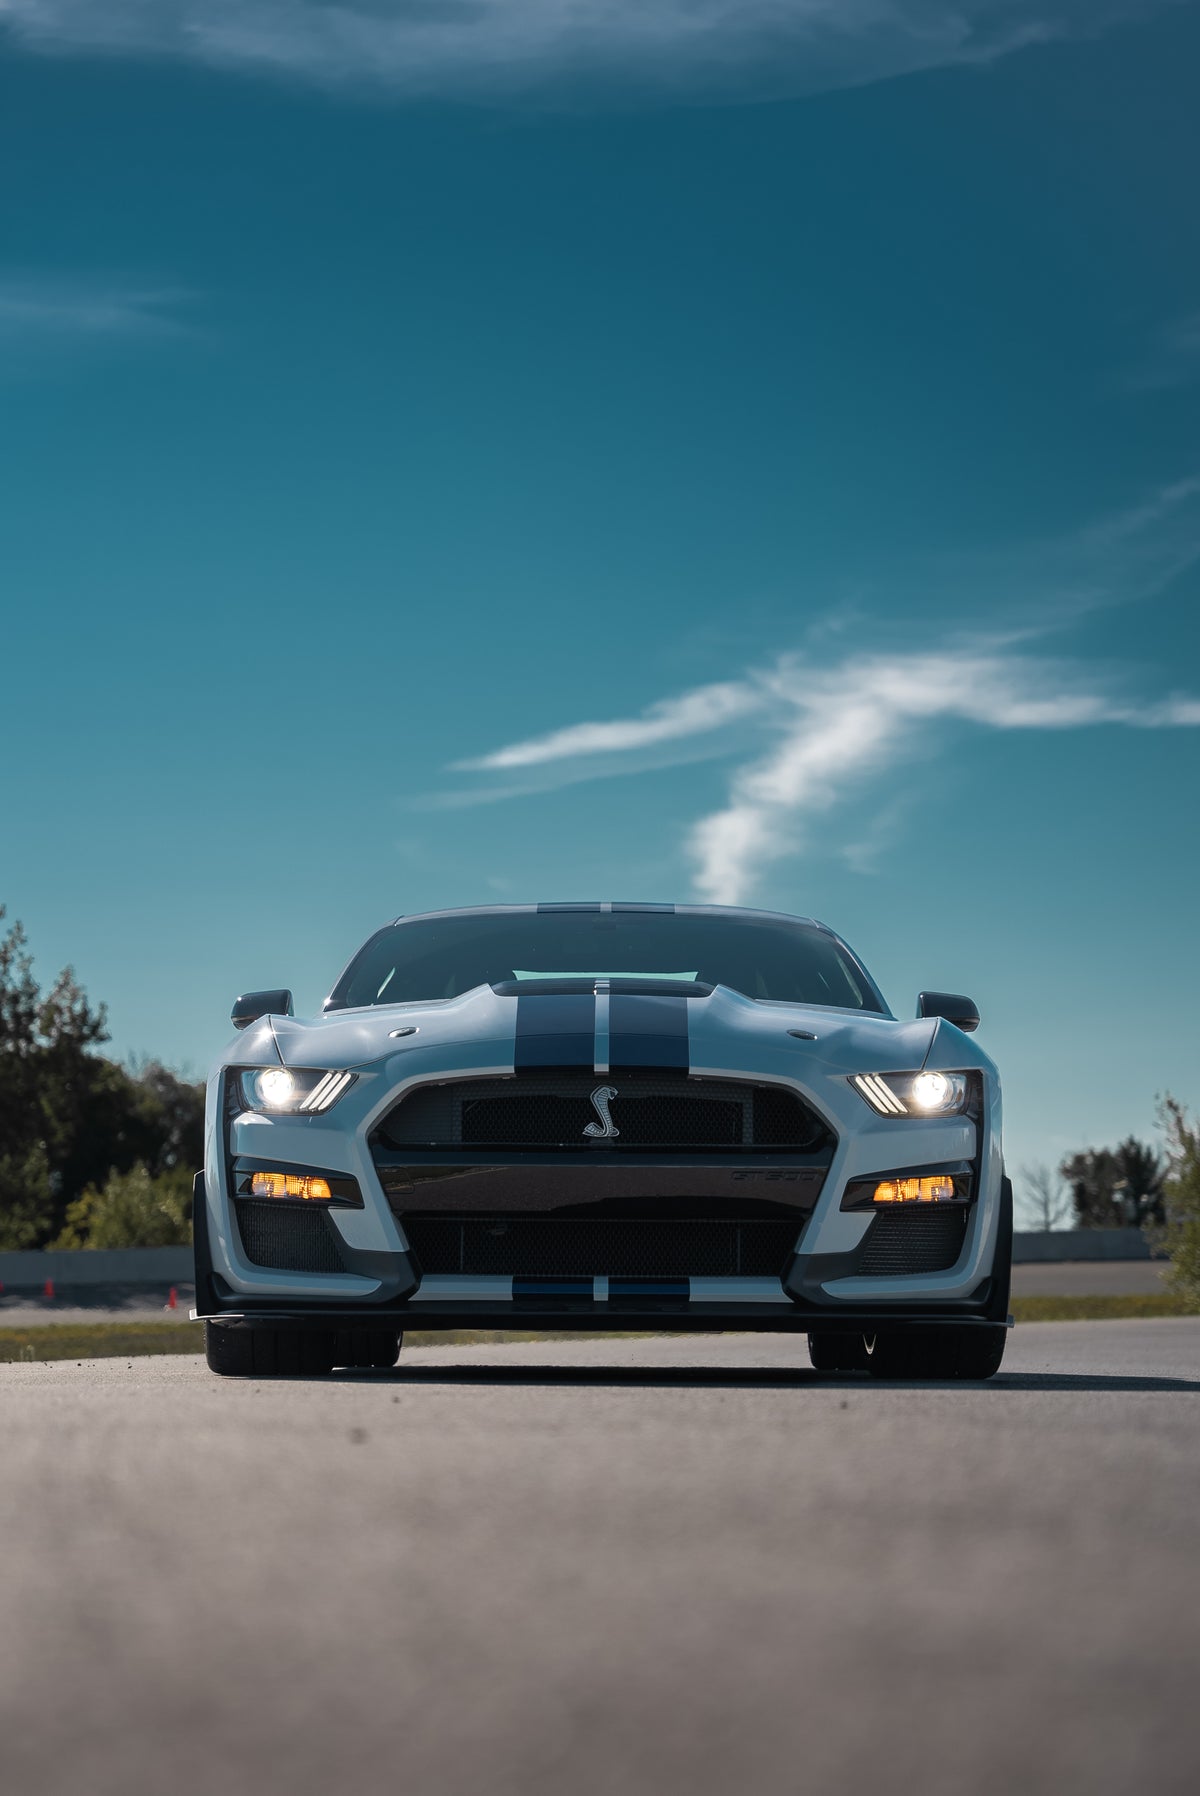 Location - Rental | Ford Mustang Shelby GT500